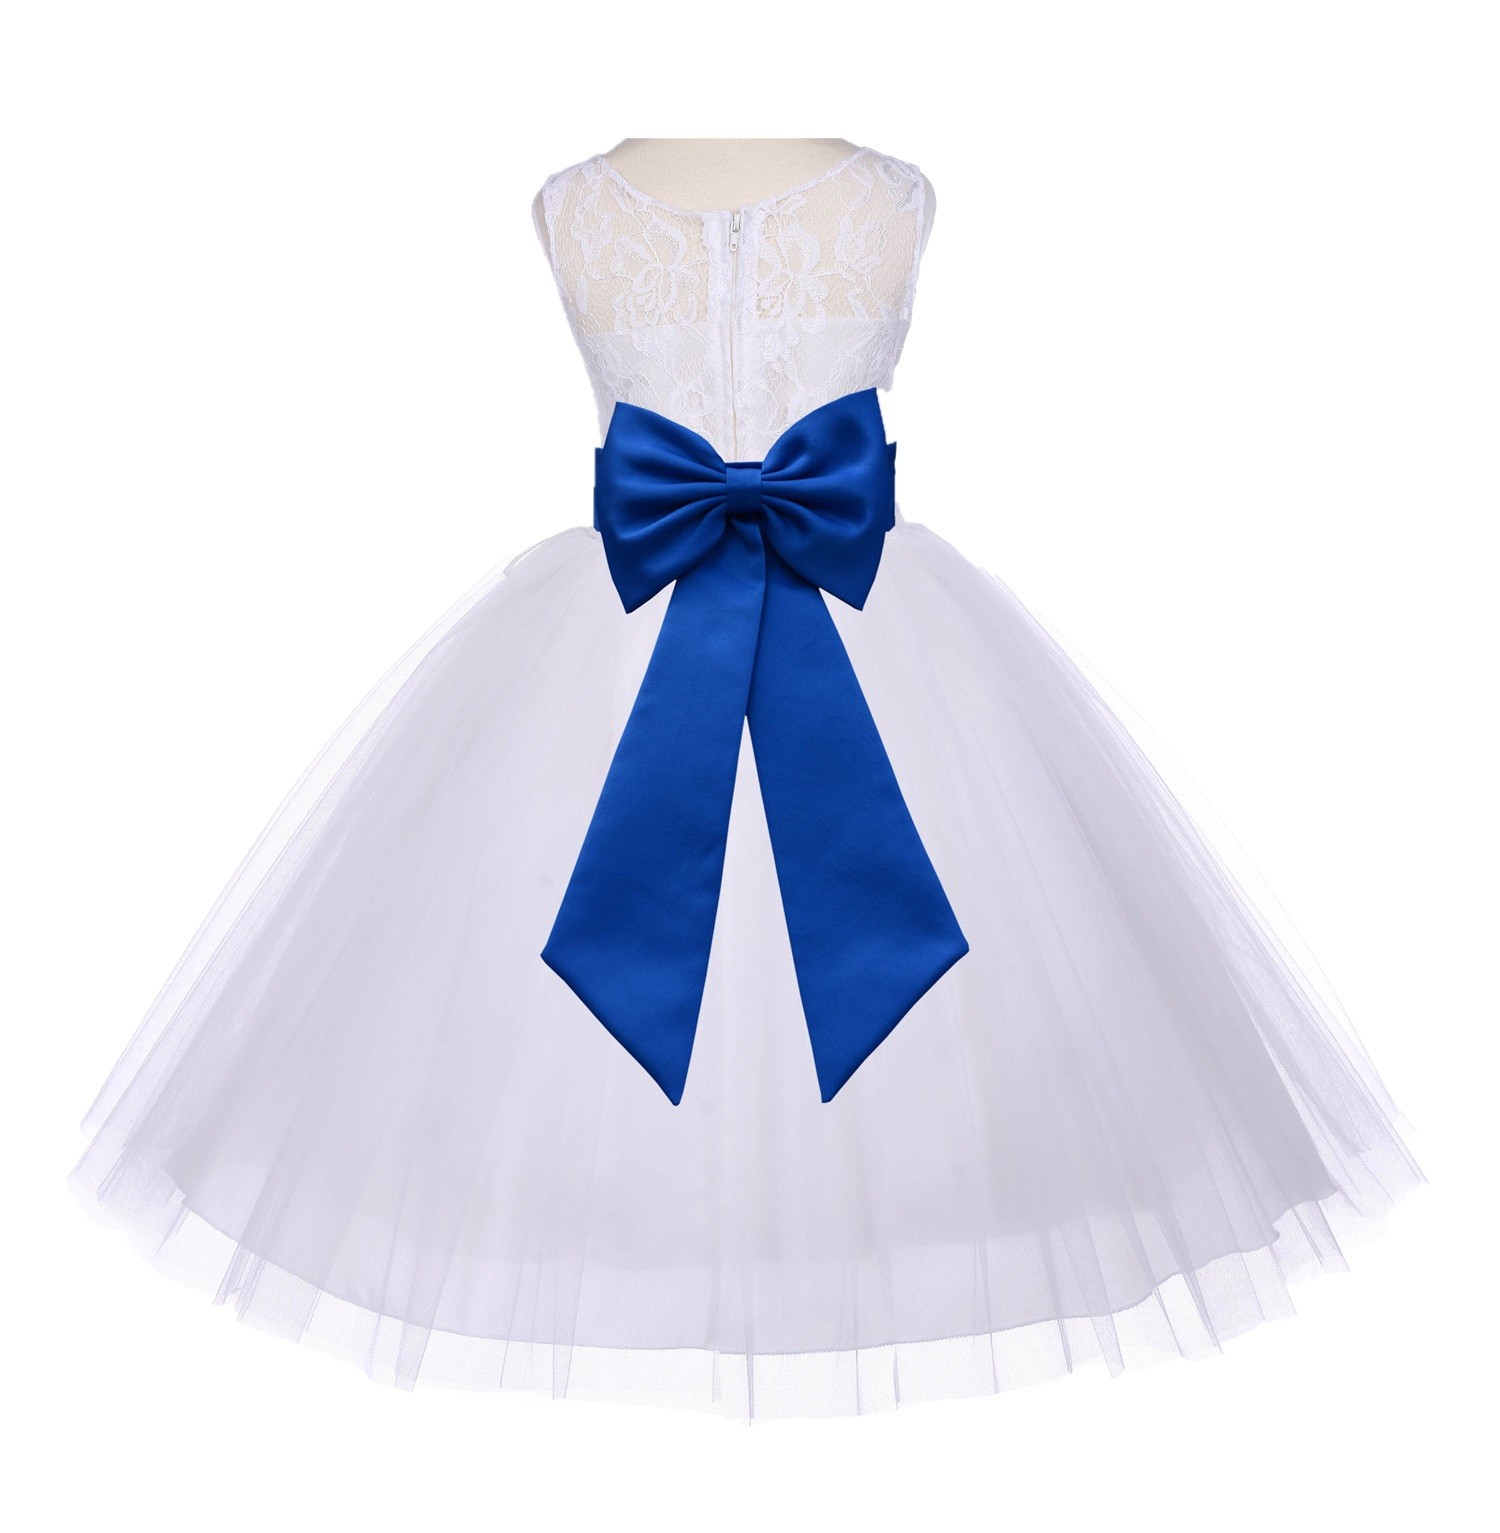 Ivory/Royal Blue Floral Lace Bodice Tulle Flower Girl Dress Bridesmaid 153T